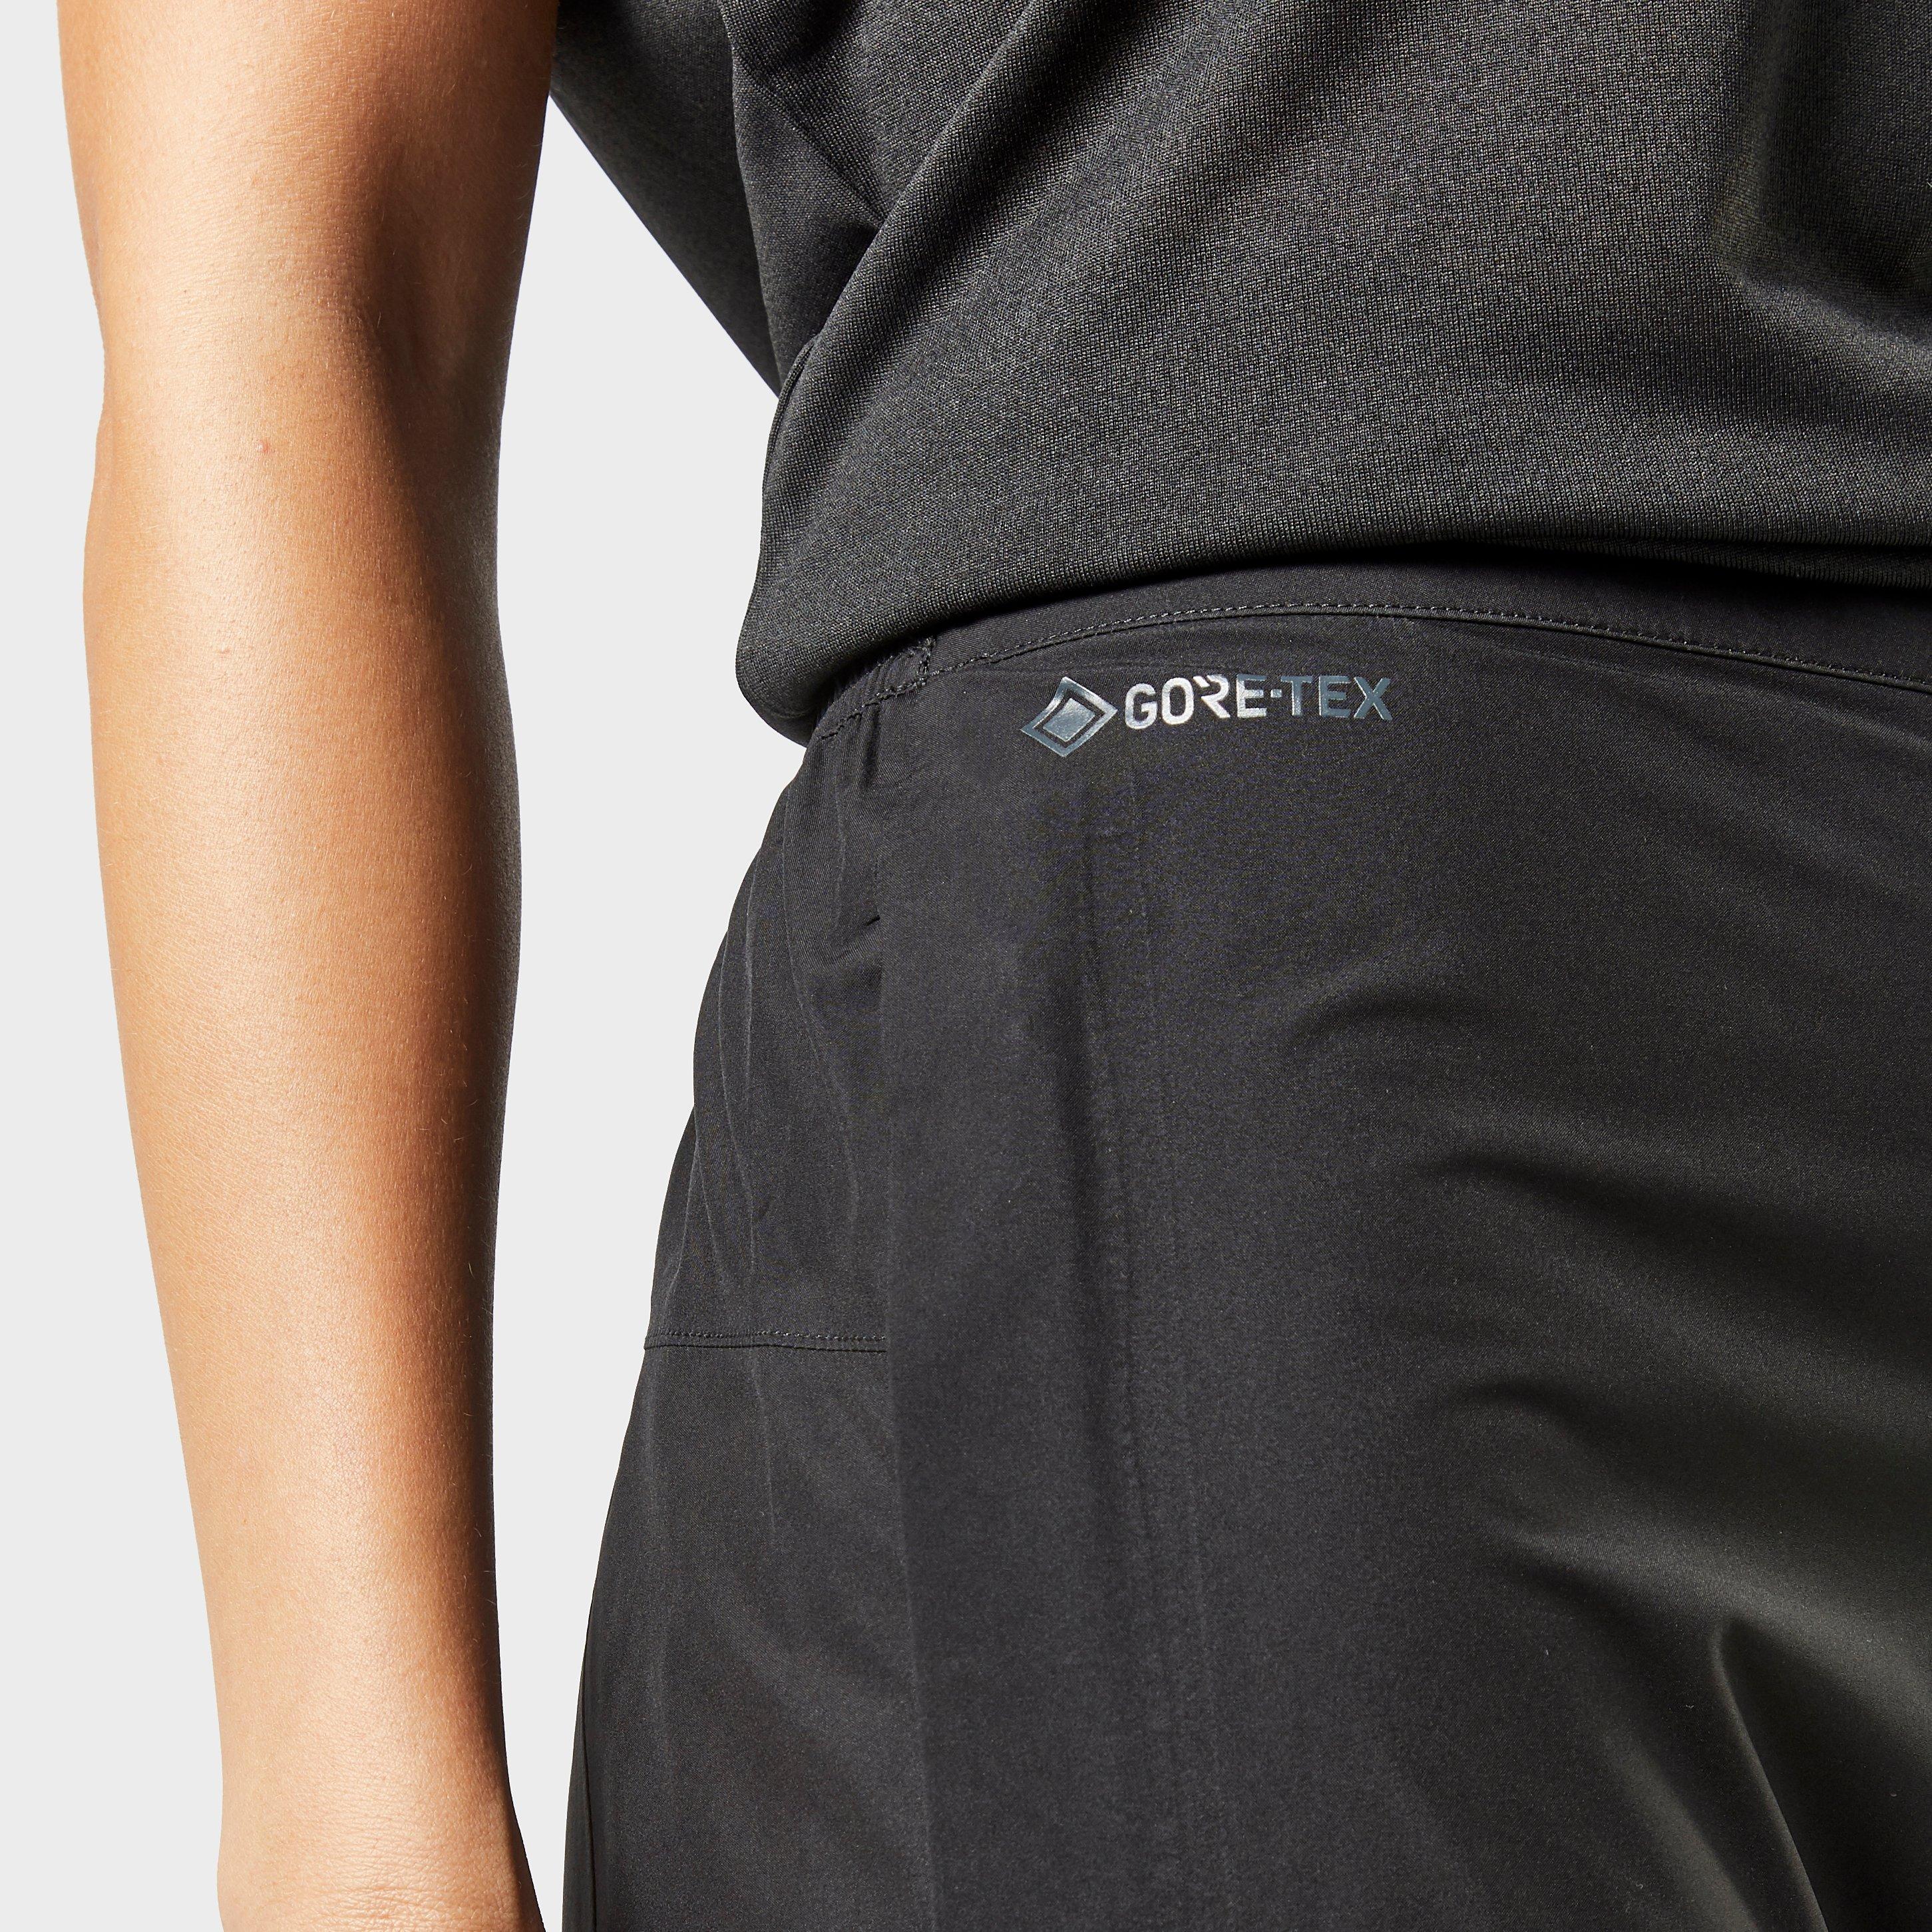 the north face dryzzle full zip pants